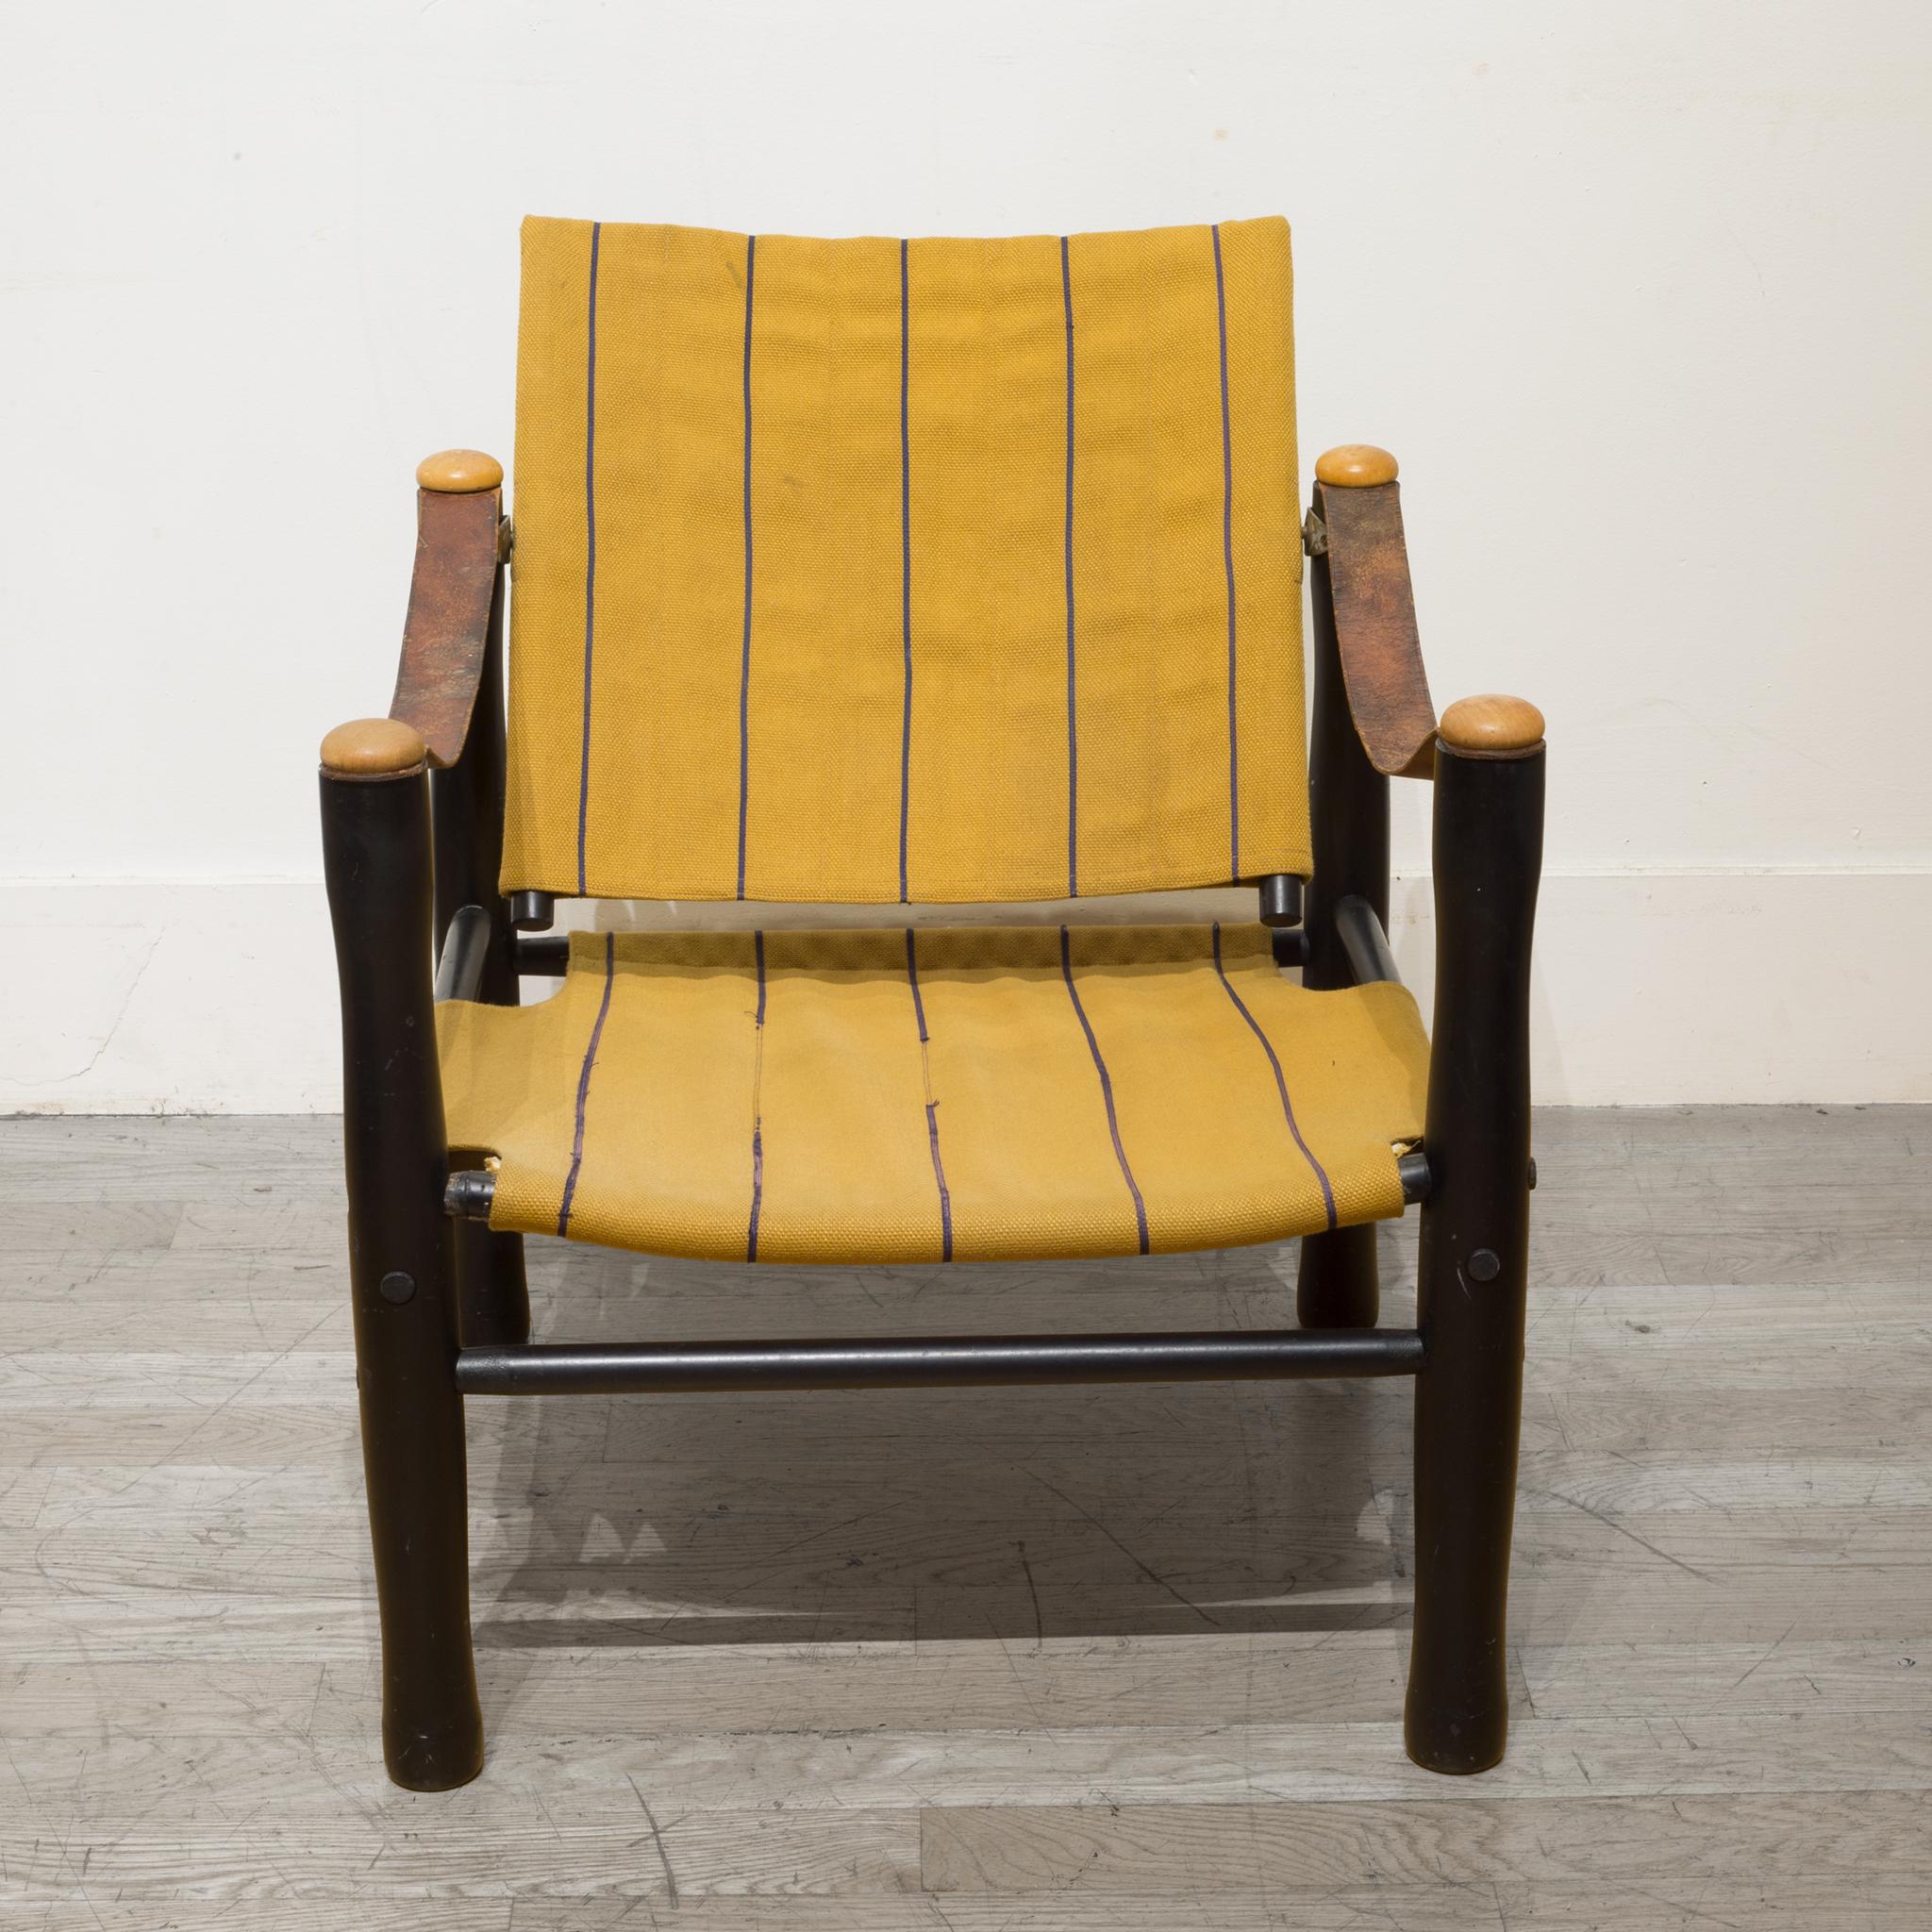 About

This is an original Mid-Century Modern safari armchair with a wooden base, leather straps and original Astrid Sampe fabric. This chair was part of the Trivia line designed to be flat packed and the purchaser would assemble at home. A